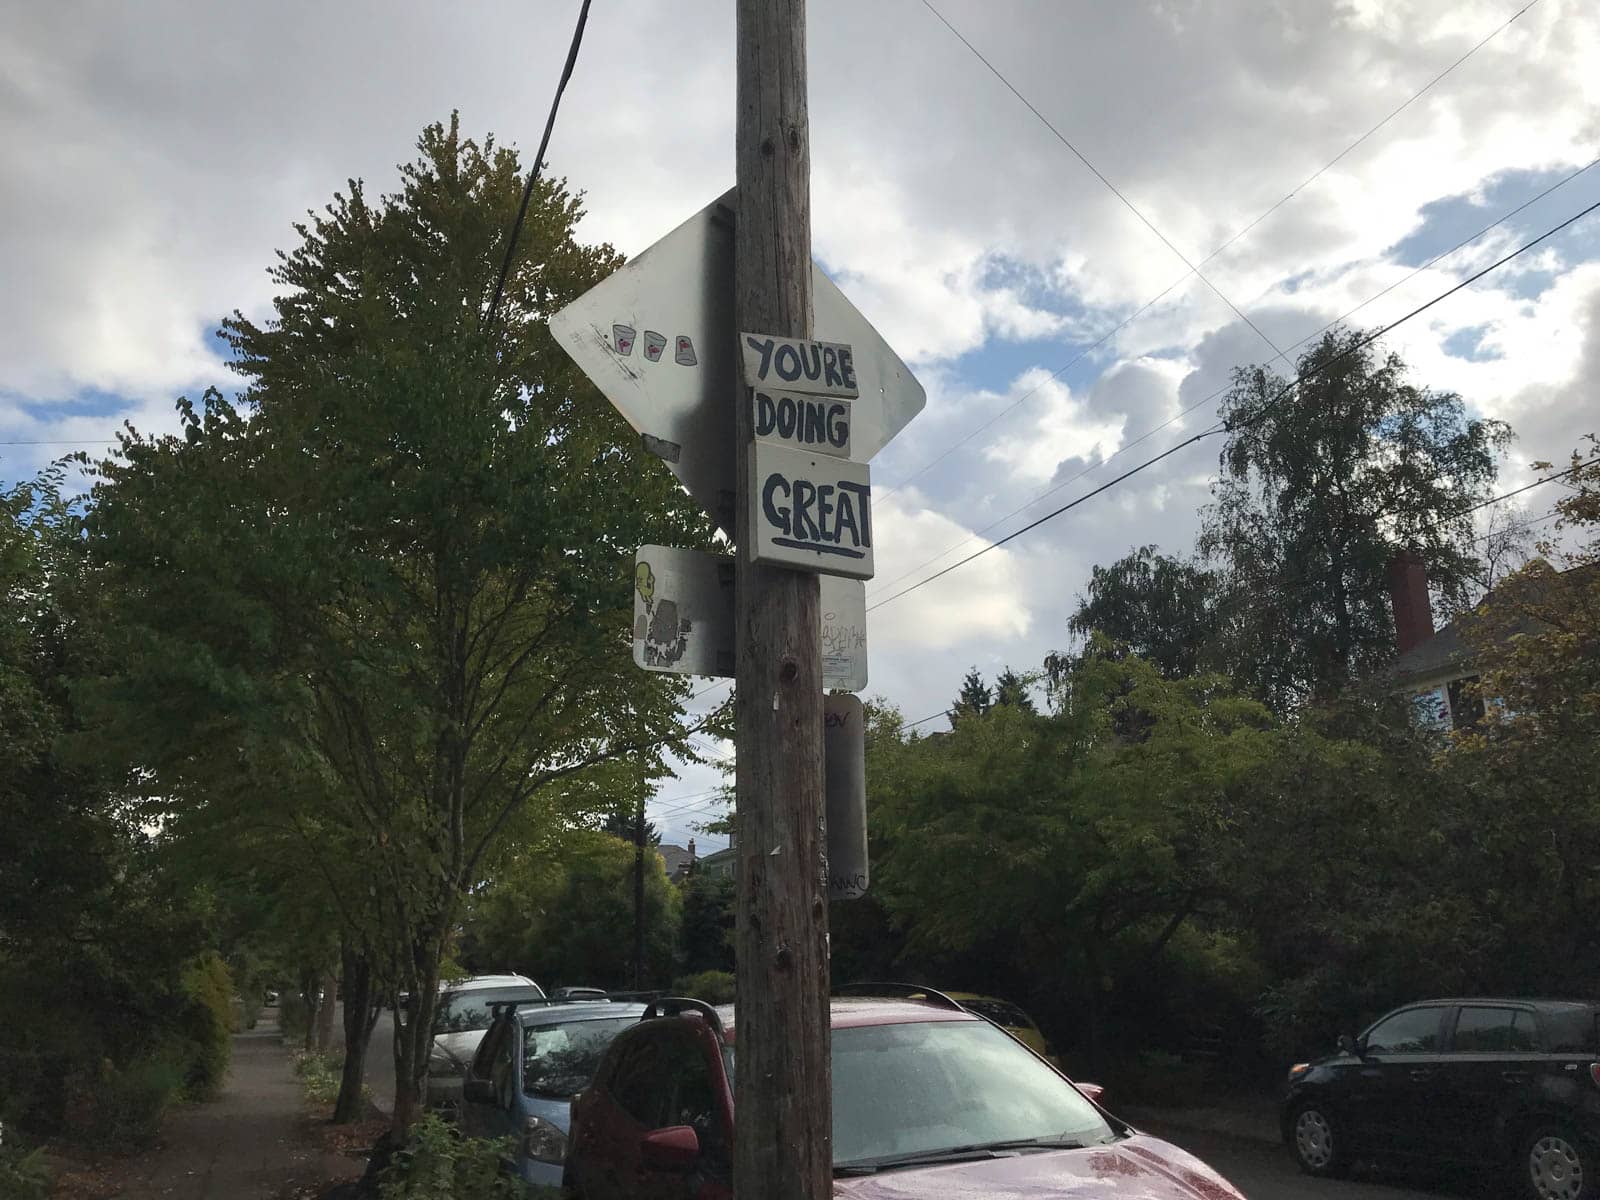 A suburban street pole with writing written on wooden signage, reading “You’re doing great”